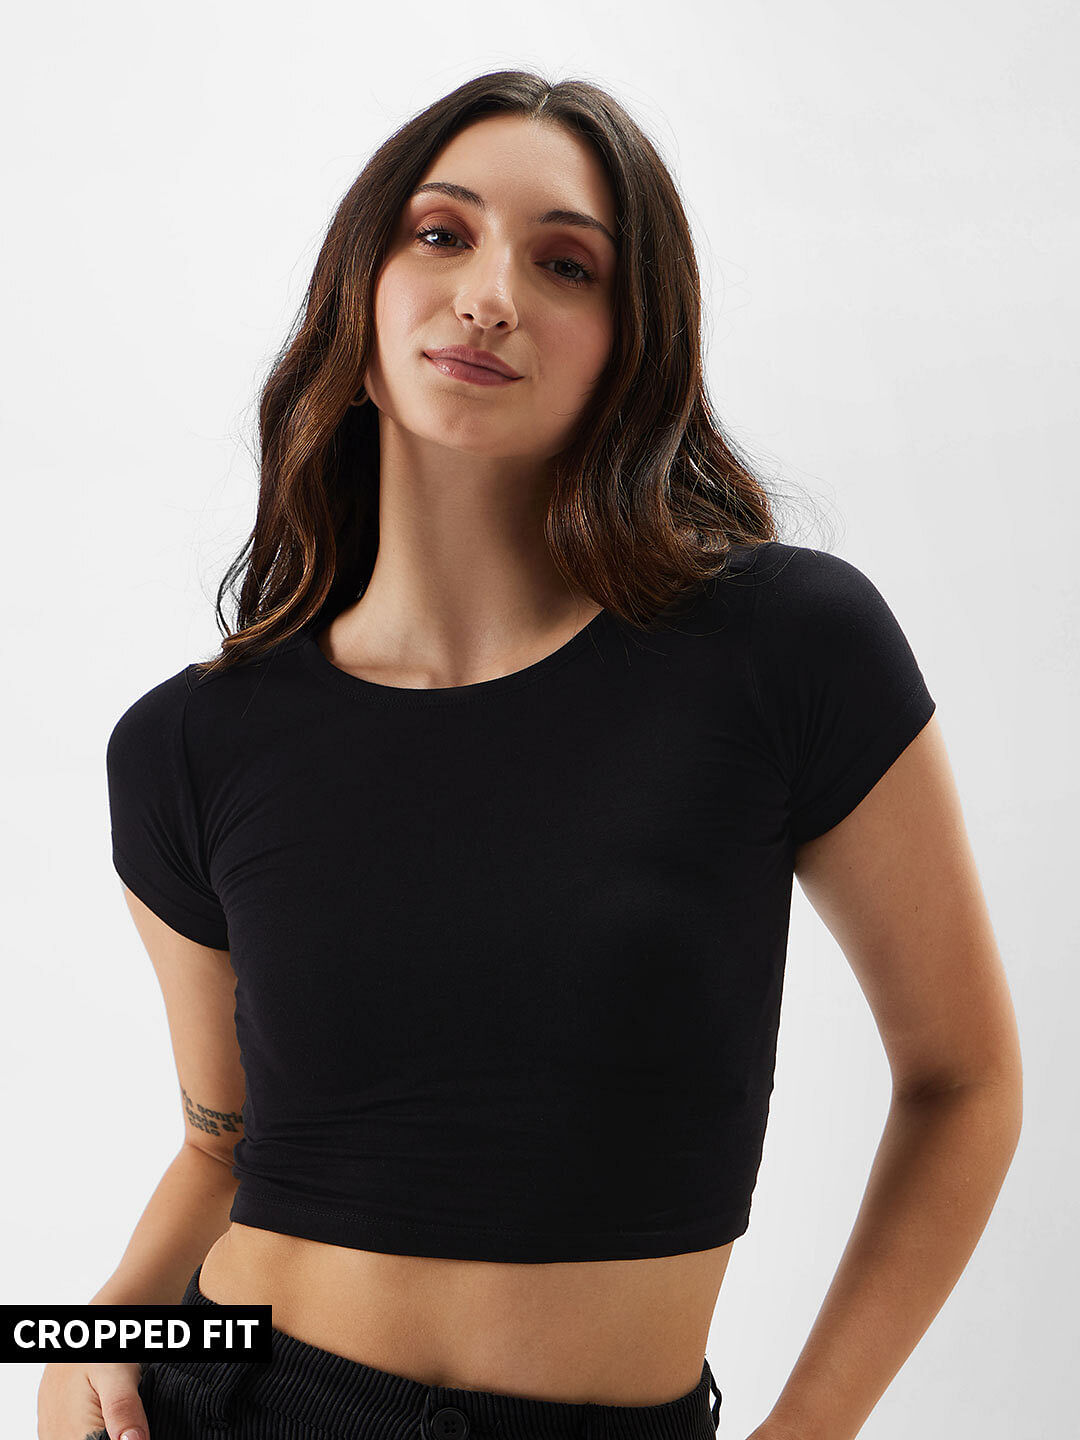 Buy Solids: Black Women's Cropped Tops online at The Souled Store